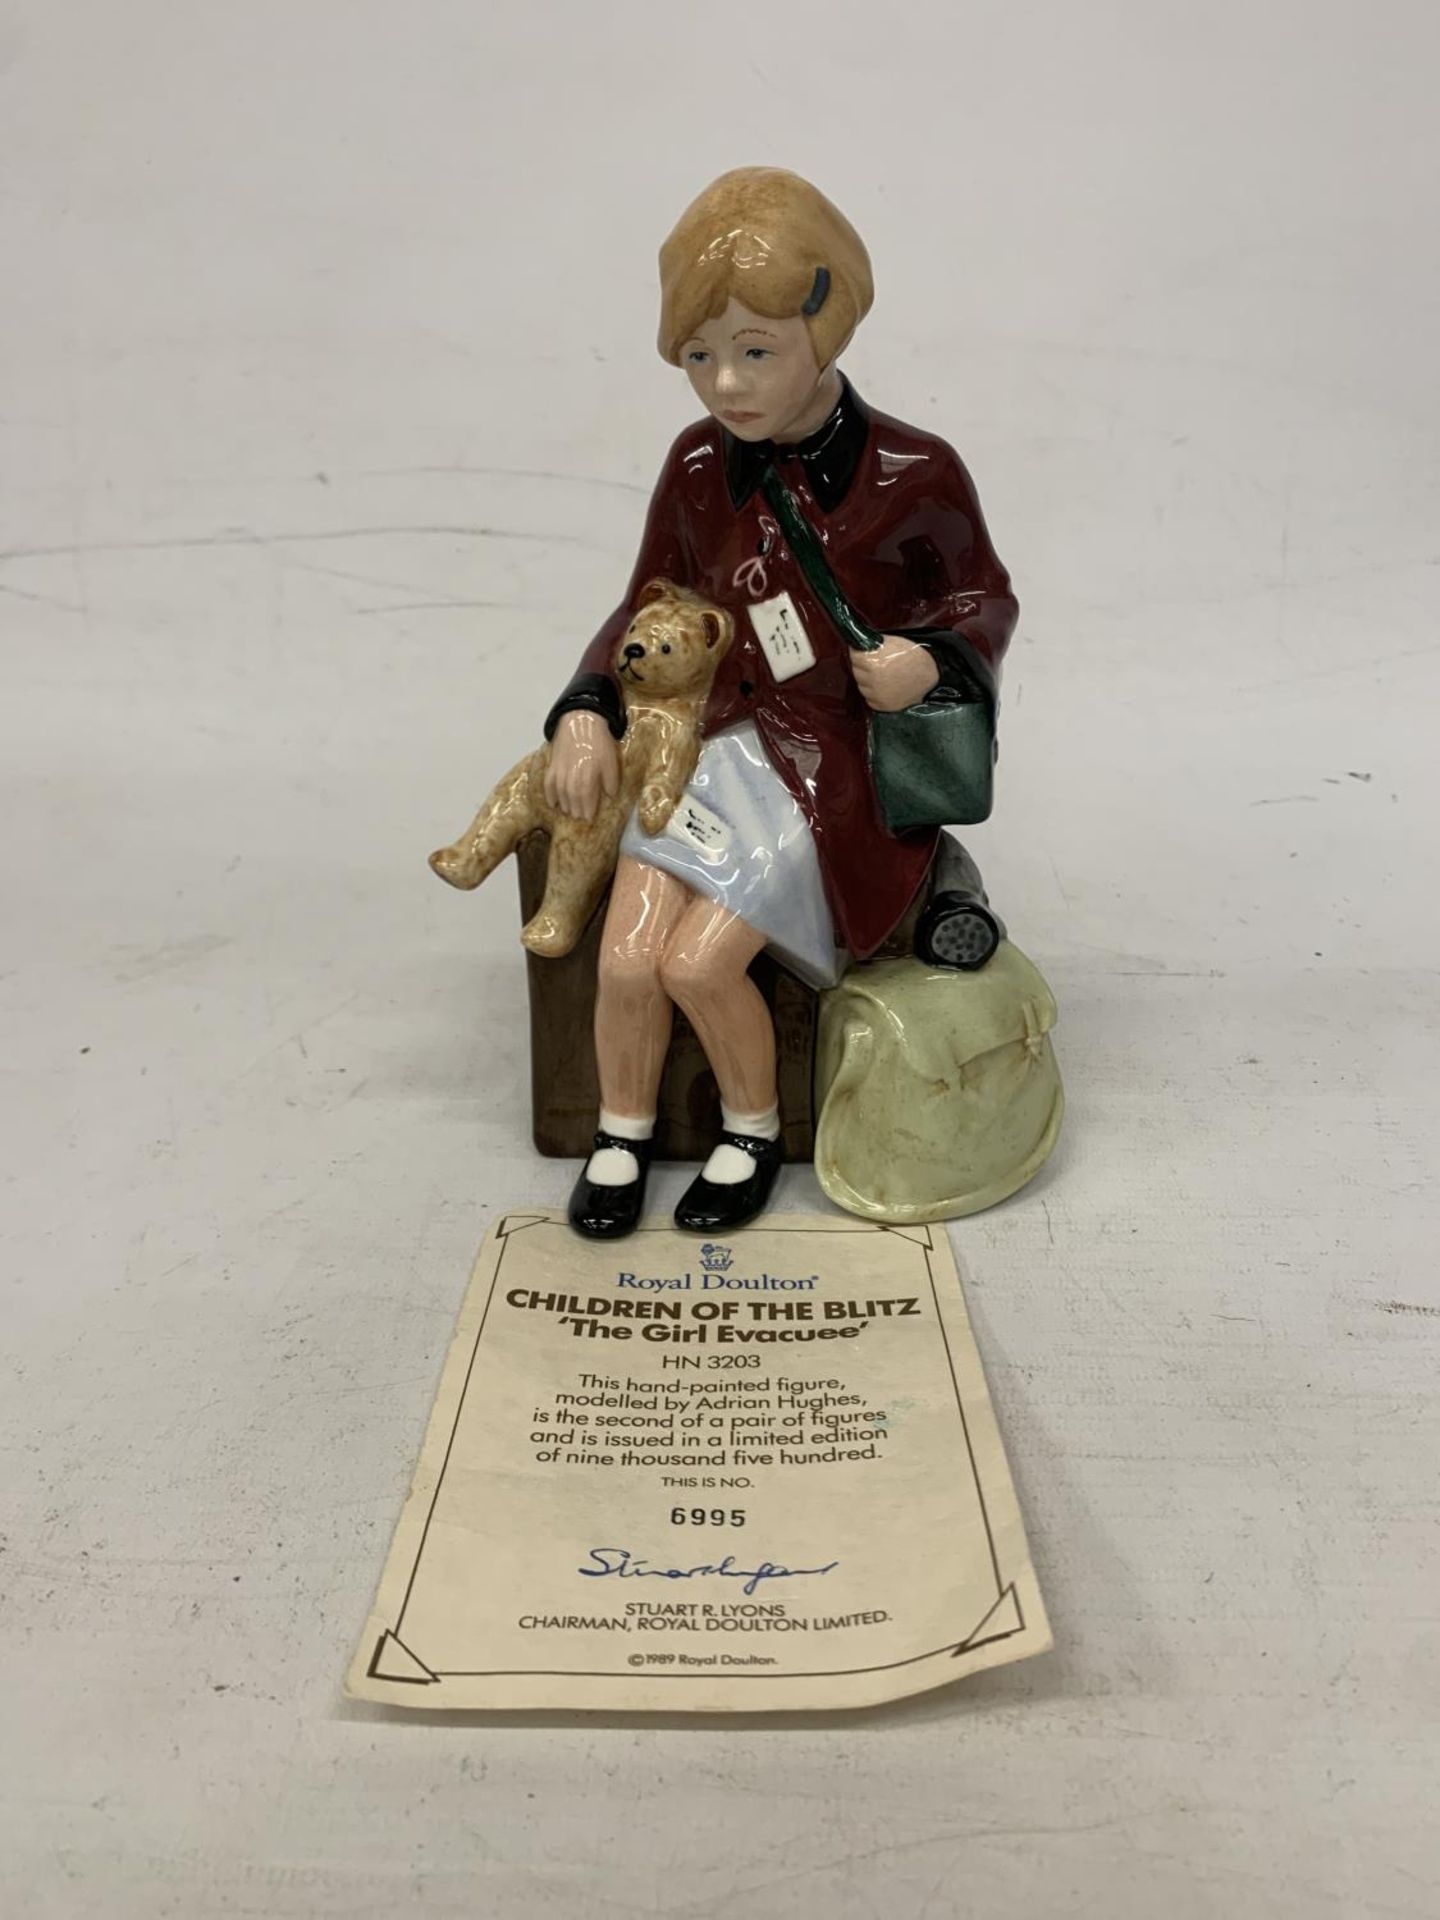 A ROYAL DOULTON FIGURE WITH CERTIFICATE "CHILDREN OF THE BLITZ - THE GIRL EVACUEE" HN 3203 LIMITED